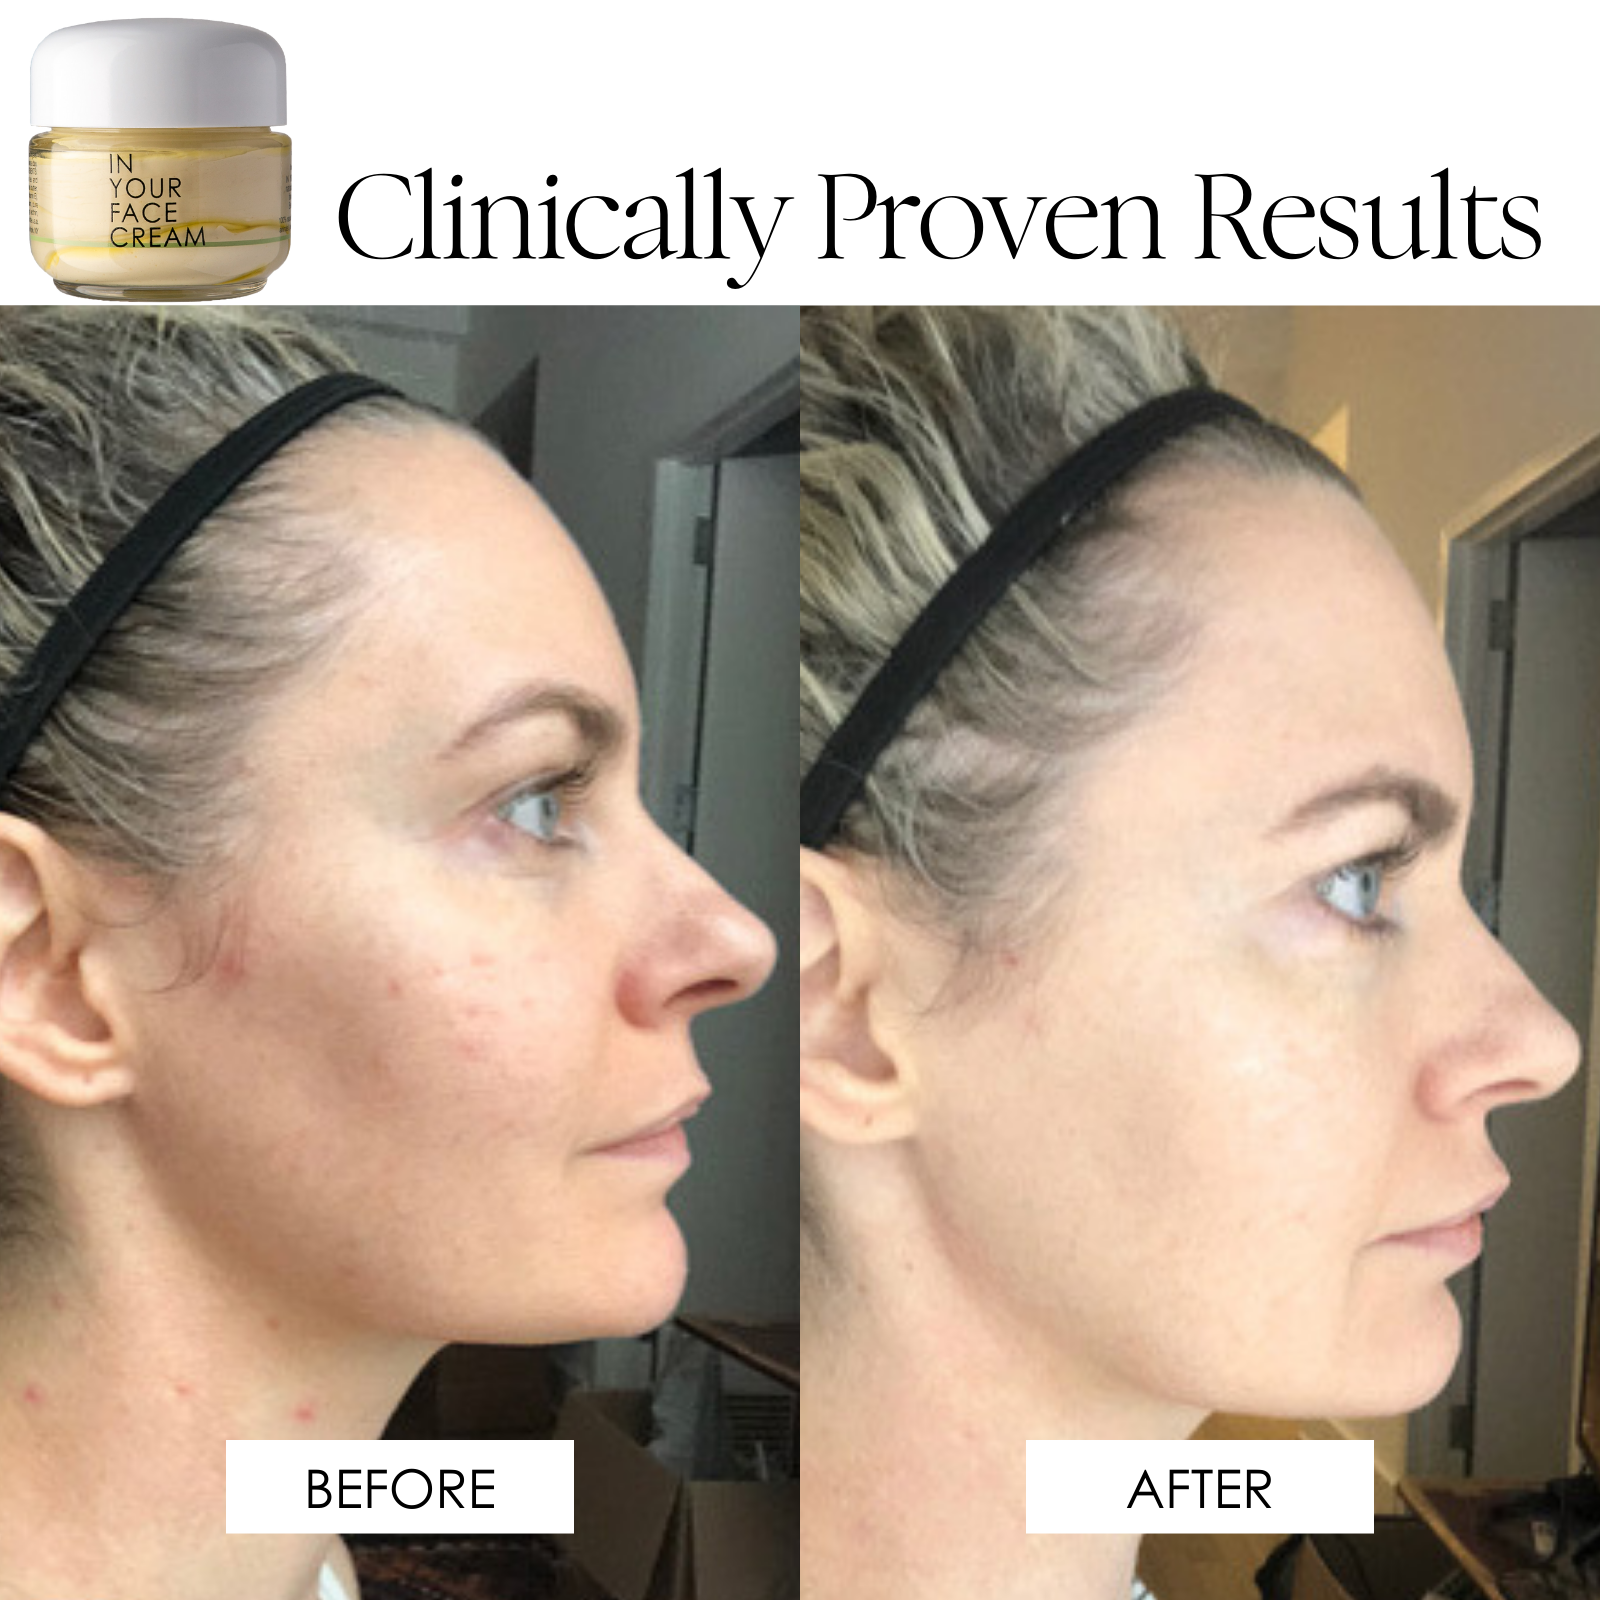 an image showing a before and after of a pretty blonde woman in her late 40's/early 50's, showing in the before her skin showing some hyperpigmentation and dullness. The image on the right saying "after", shows her skin looking brighter and more of an even skin tone. 